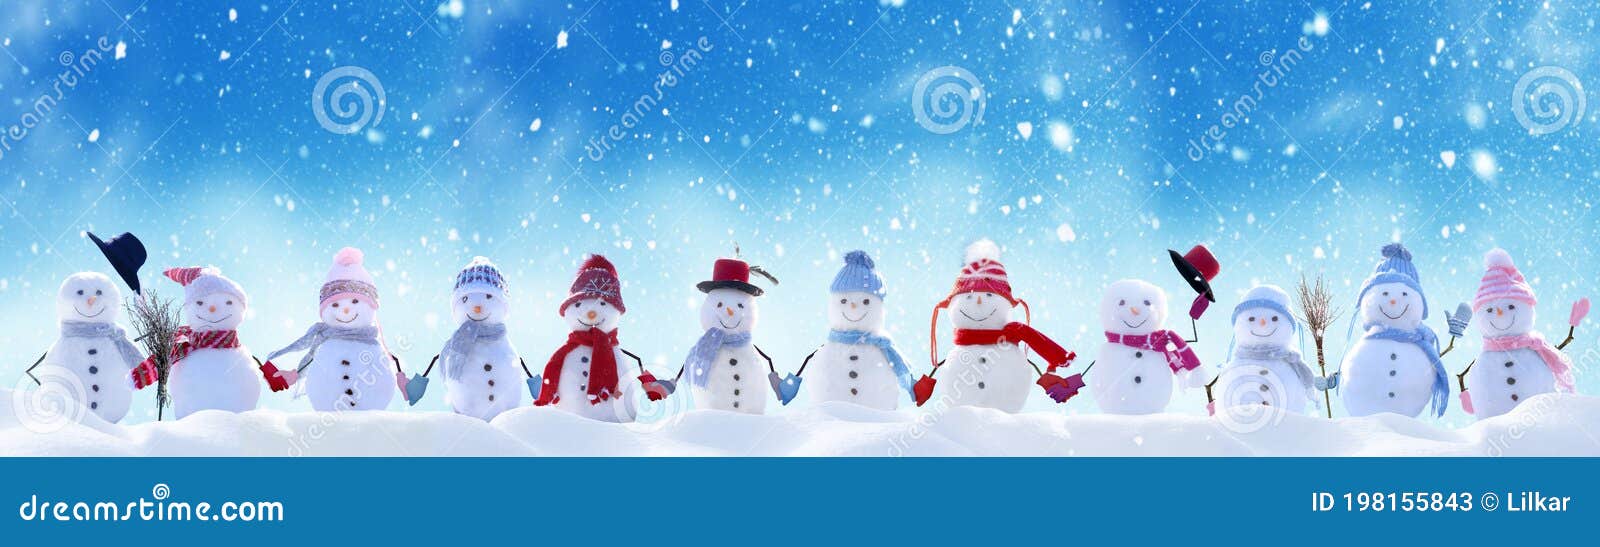 merry christmas and new year greeting card with copy-space.many snowmen standing in winter christmas landscape.winter